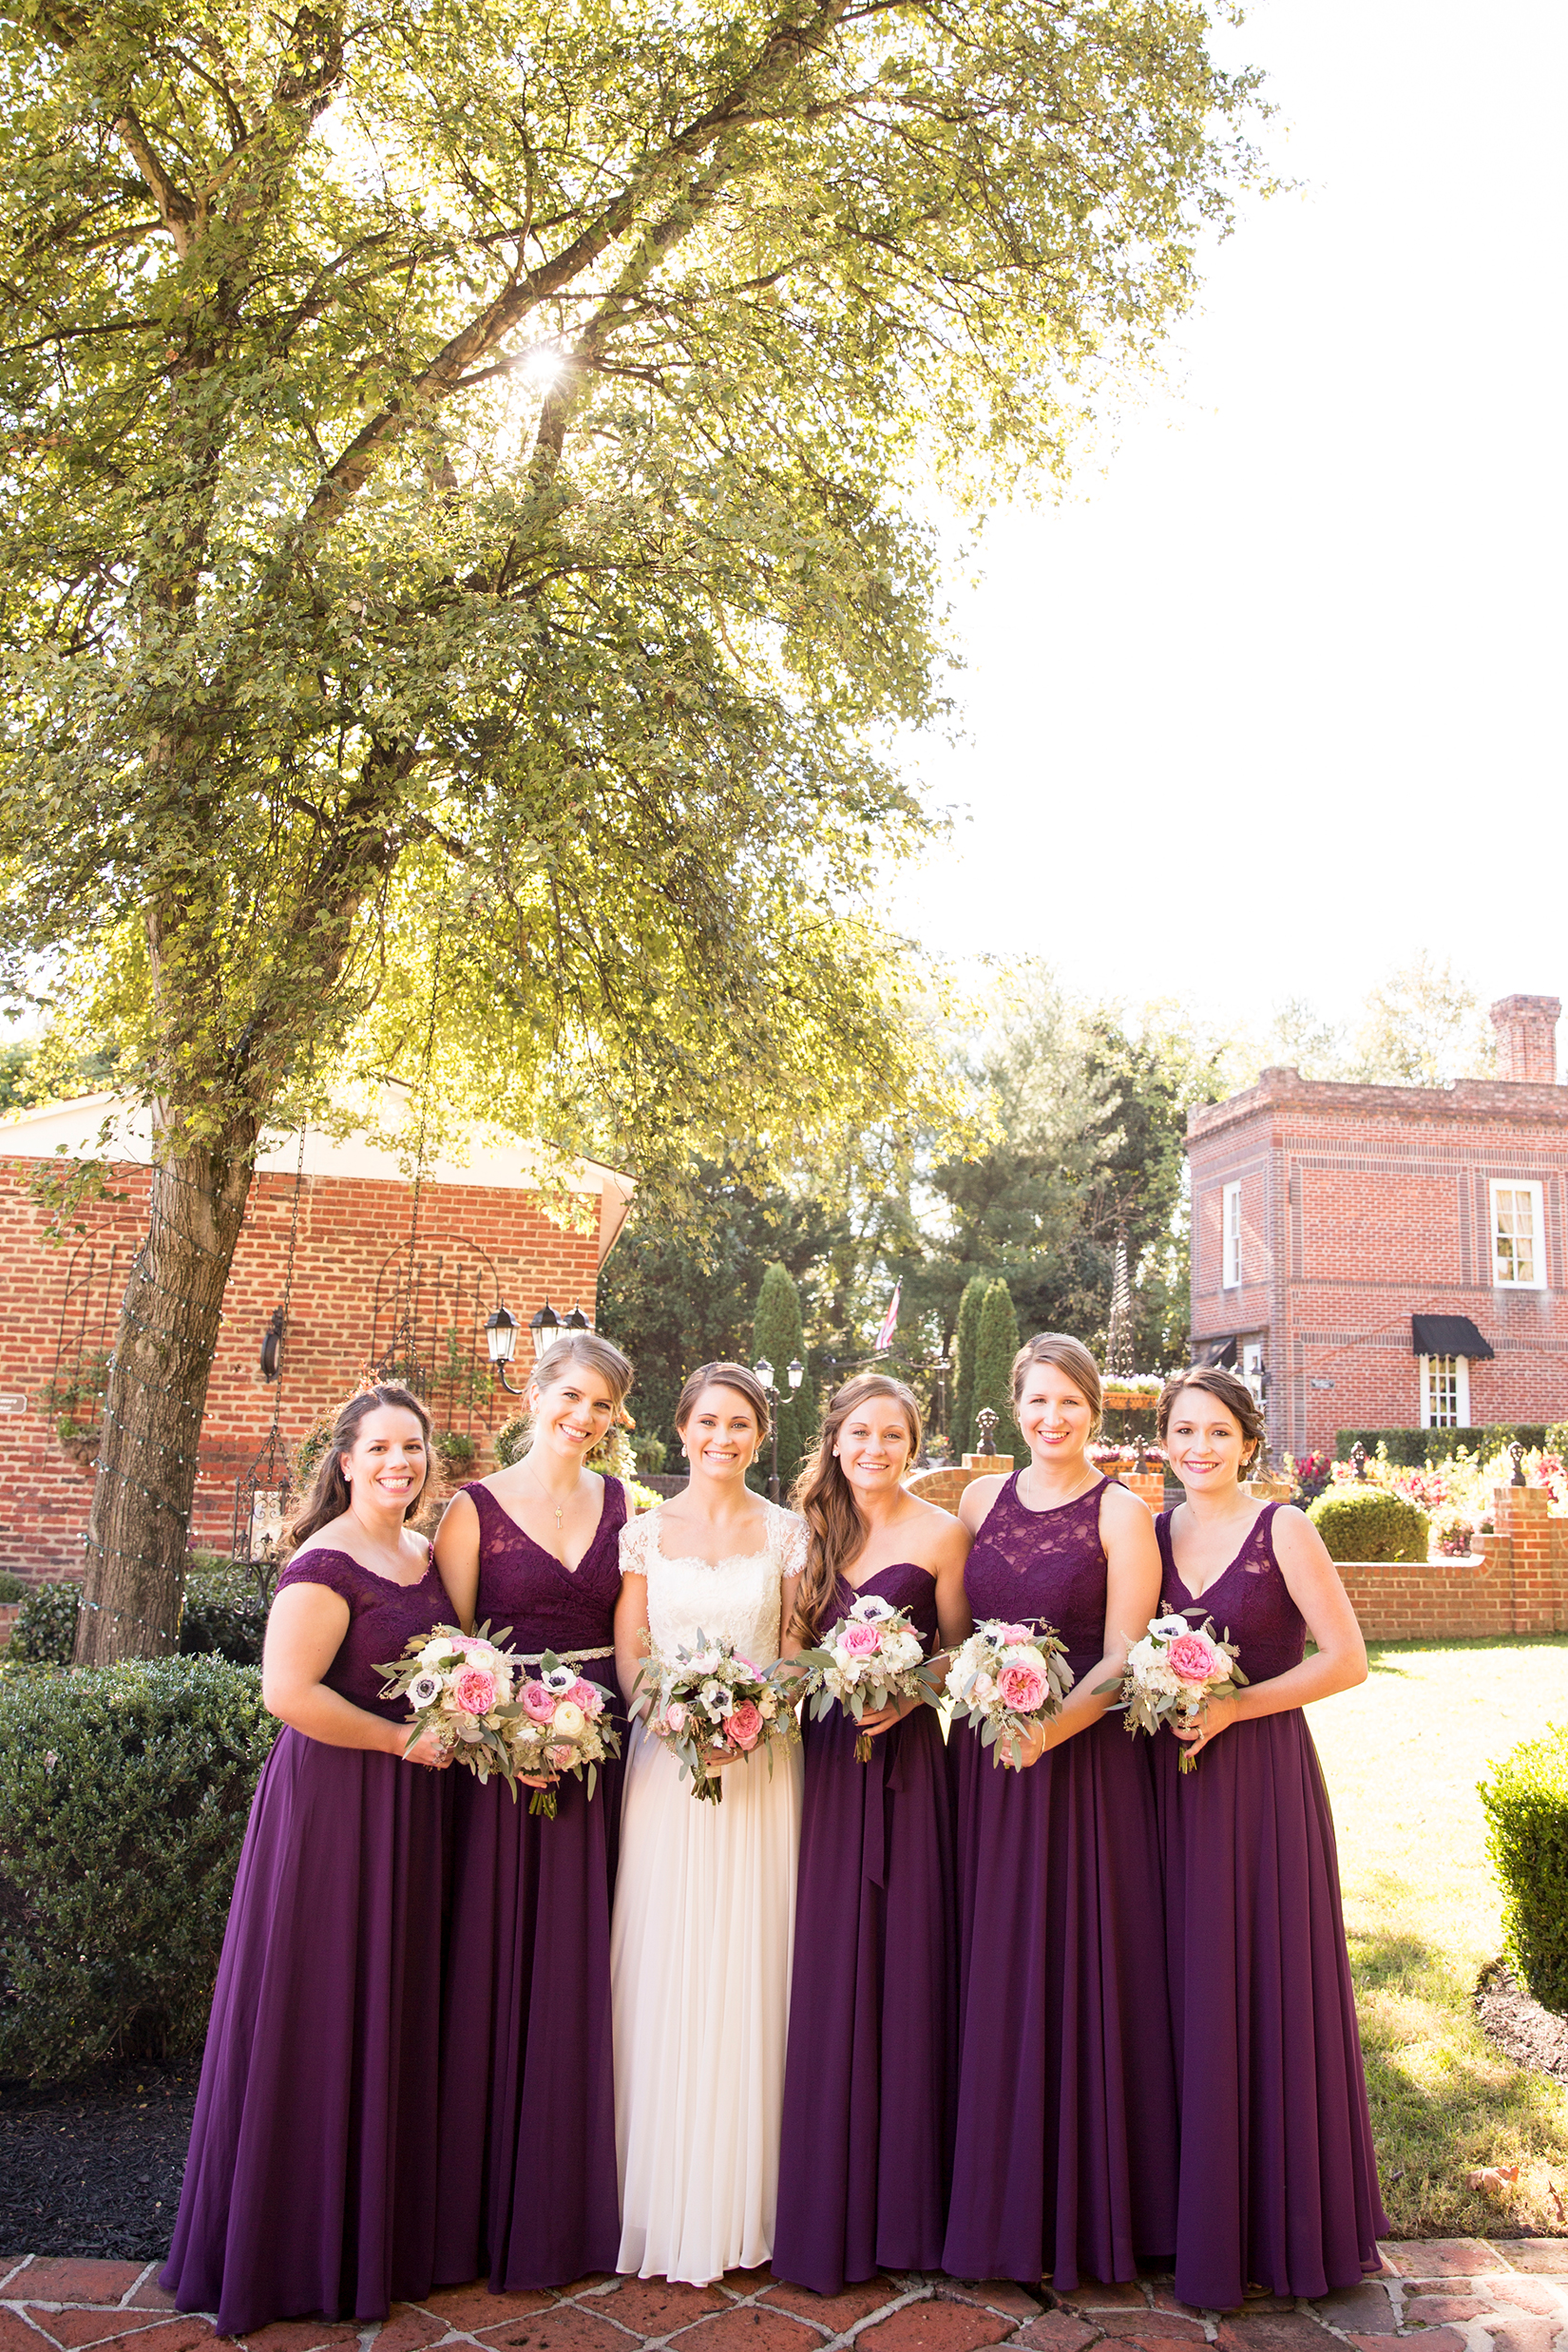 Best Places to Buy Bridesmaid Dresses - Image Property of www.j-dphoto.com